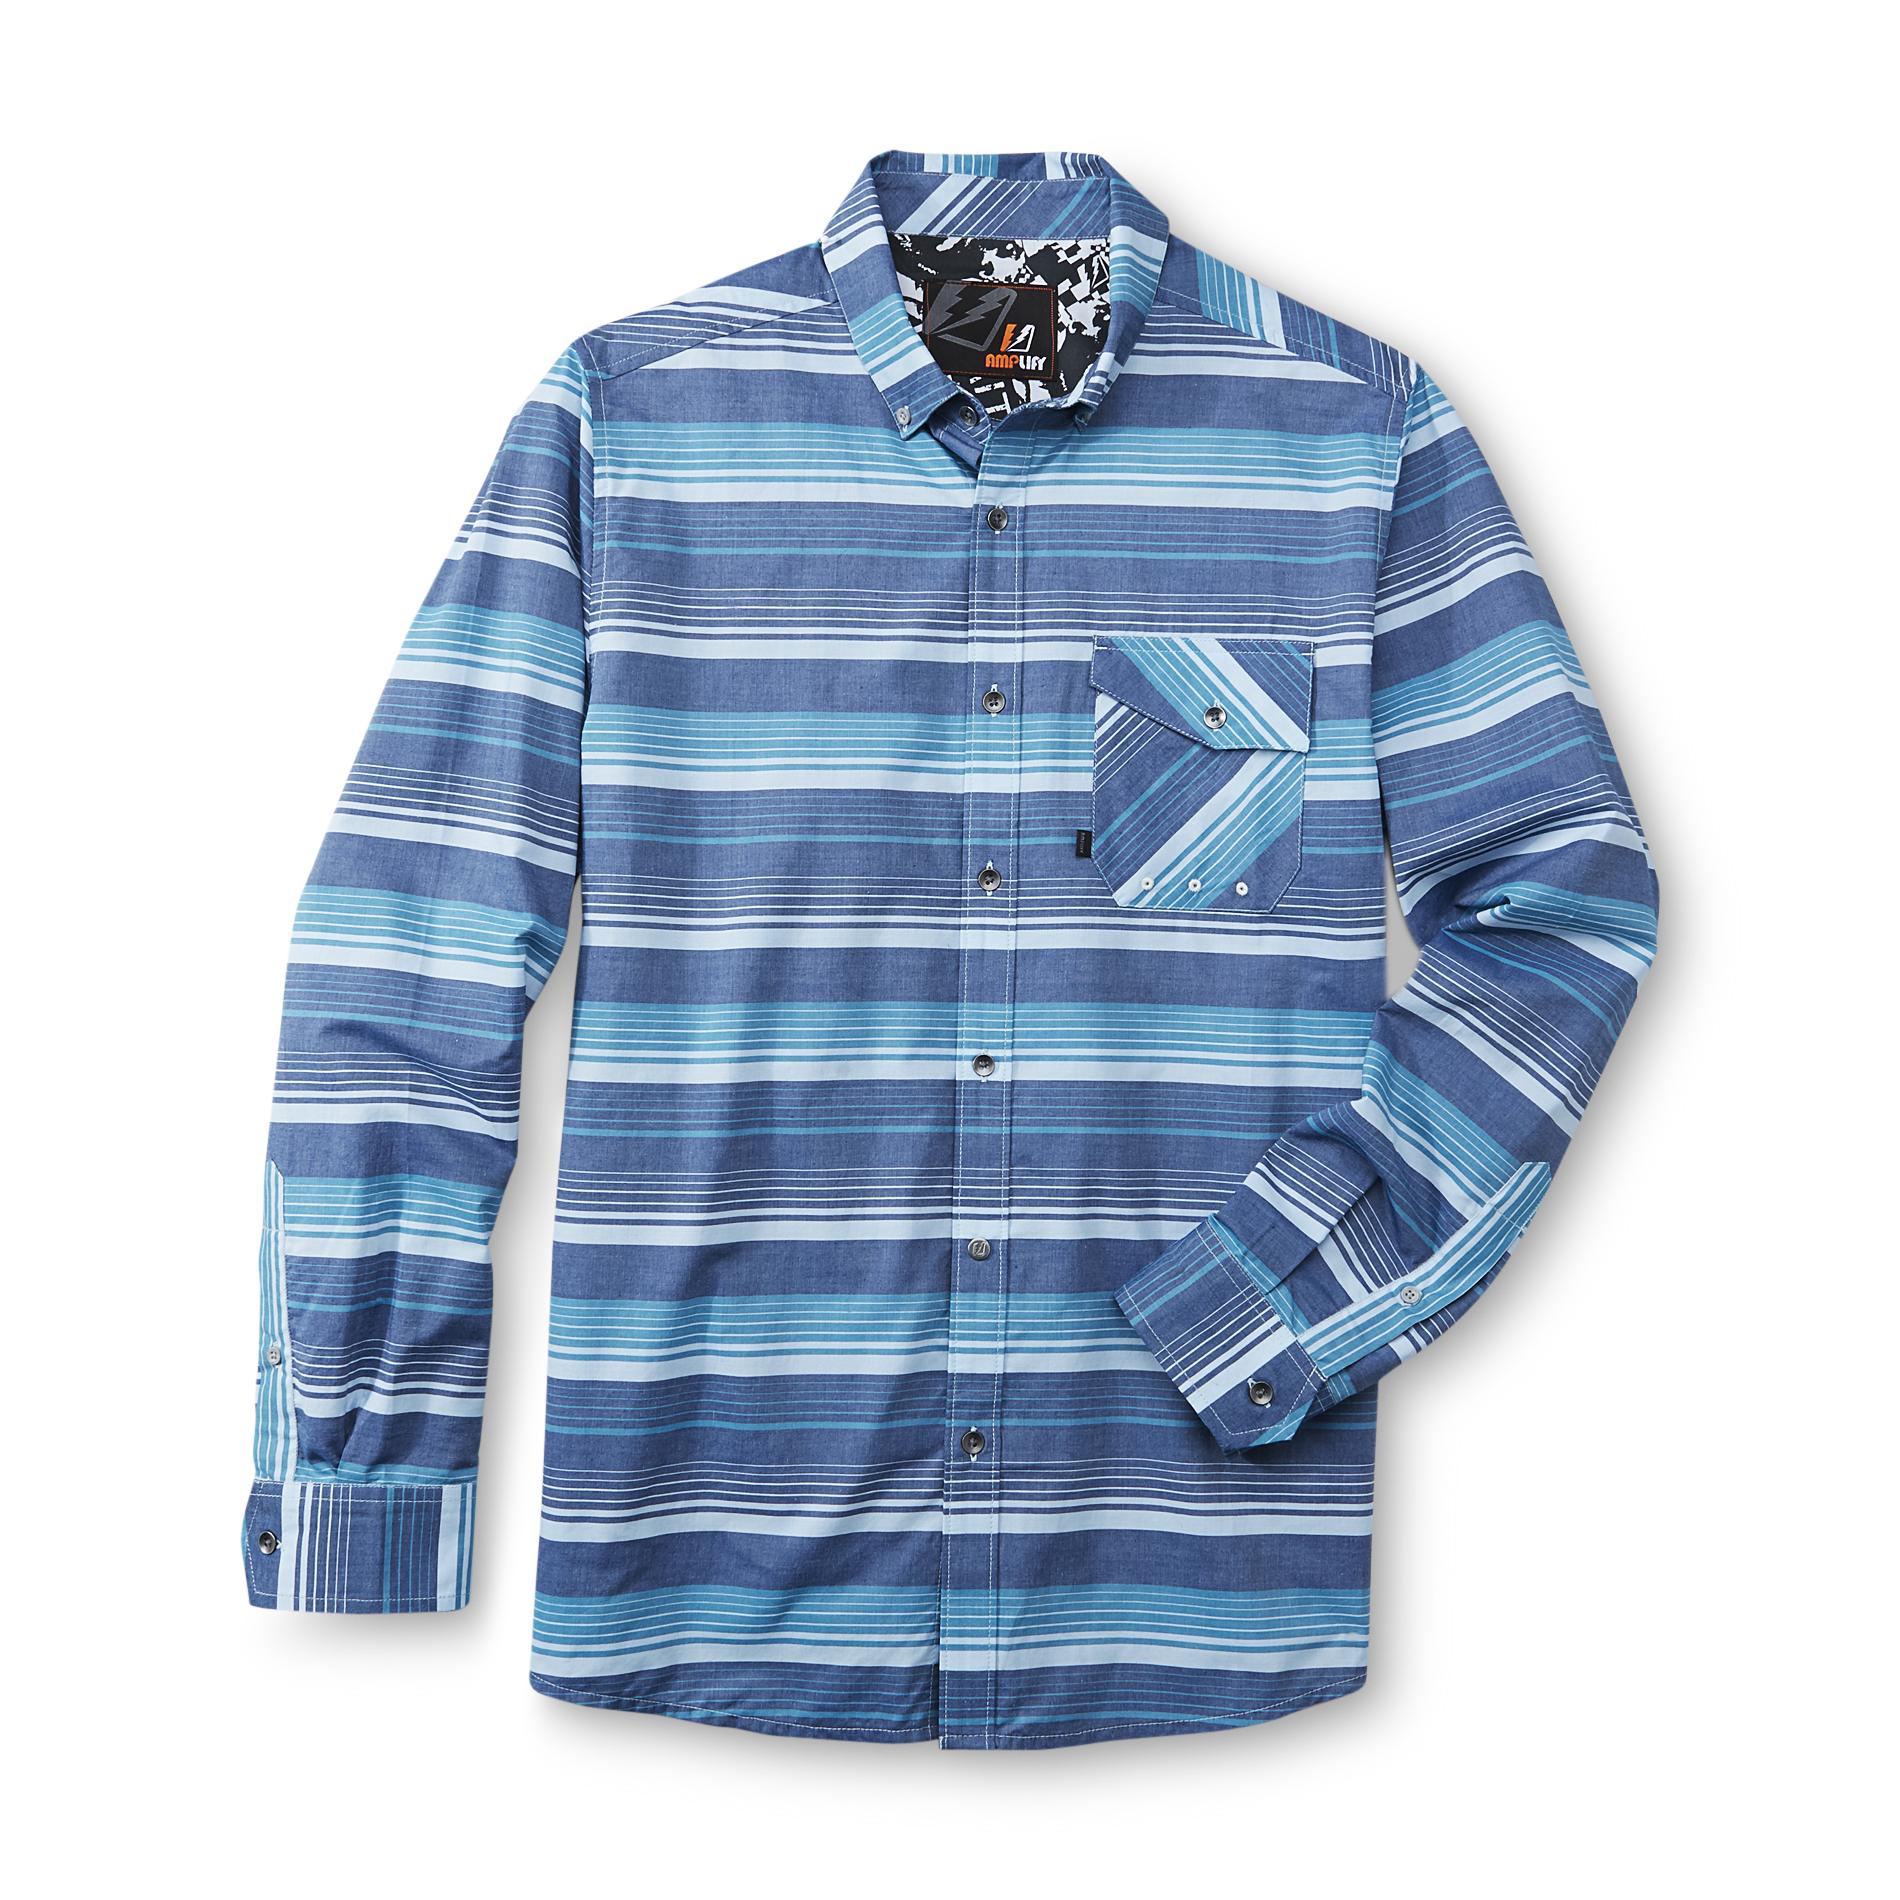 Amplify Young Men's Casual Shirt - Striped